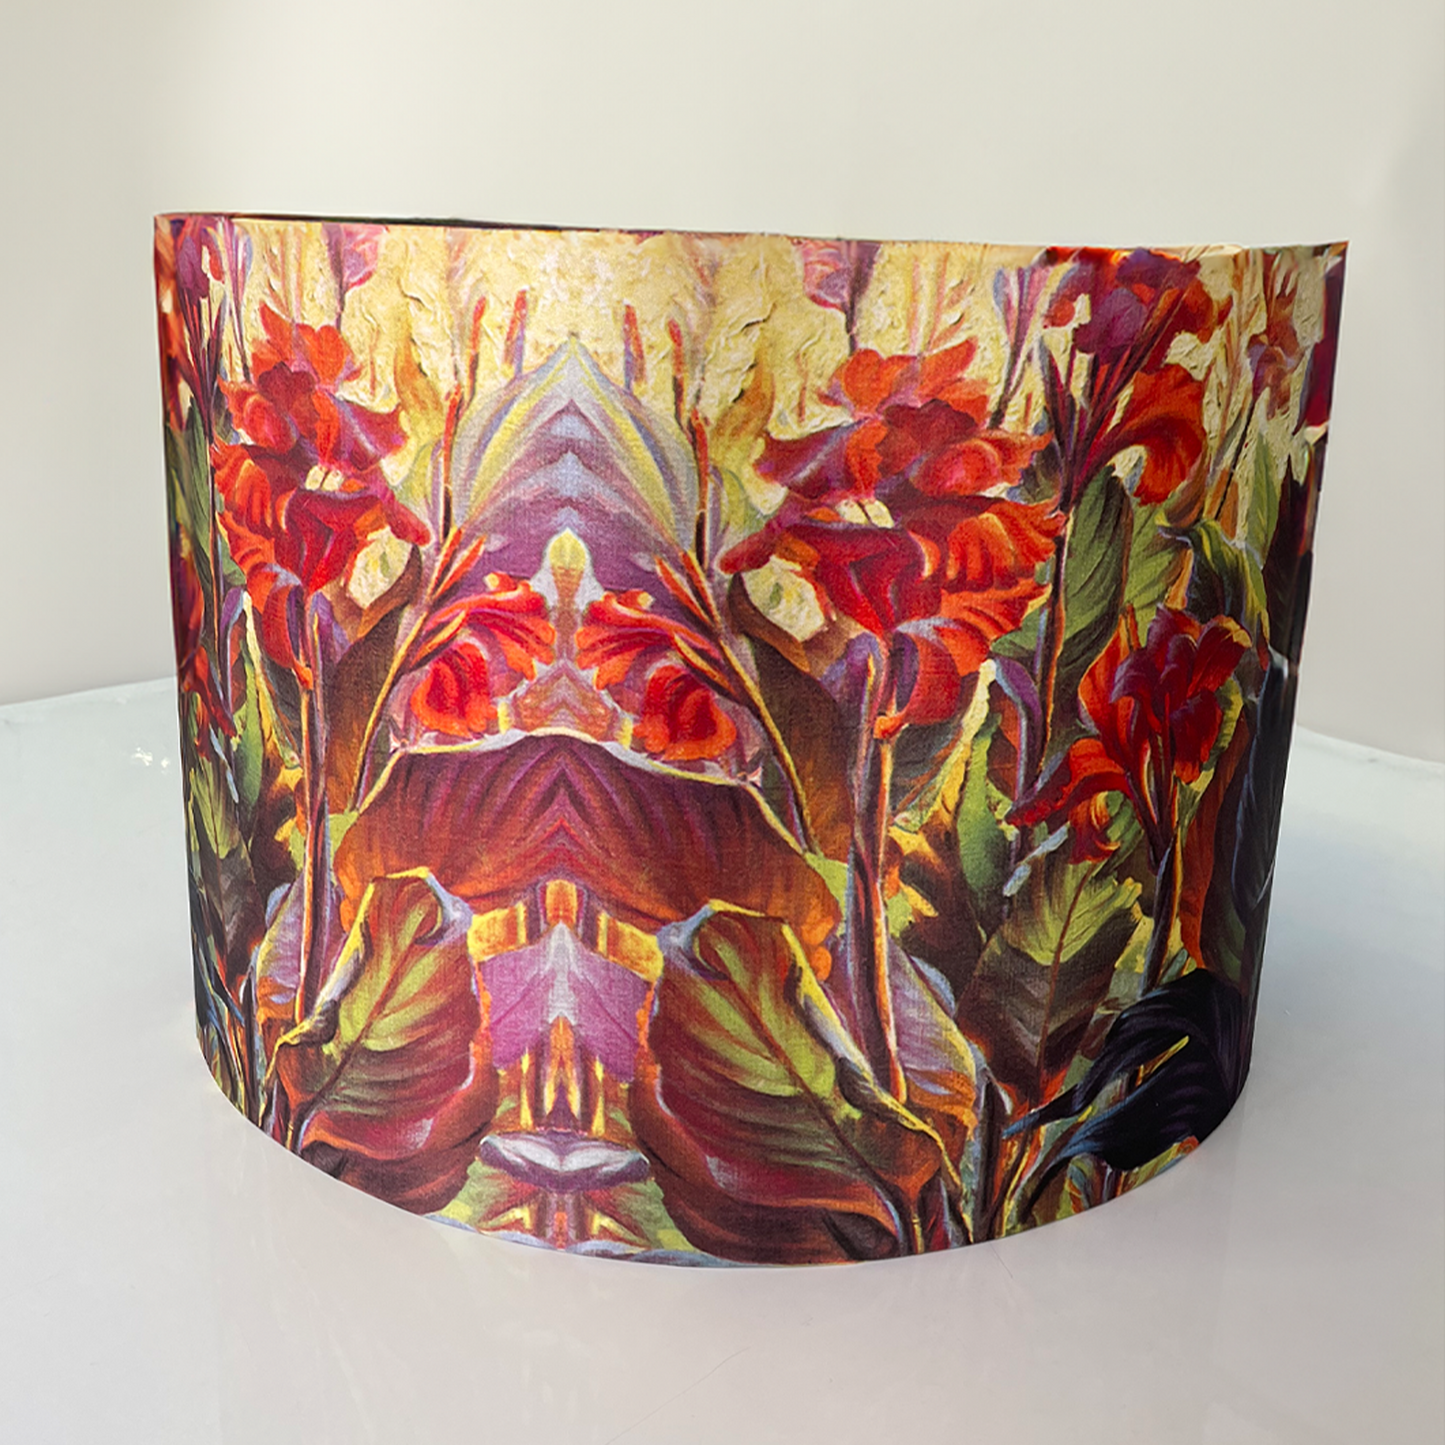 Red Cannas Lampshade - Tretchikoff